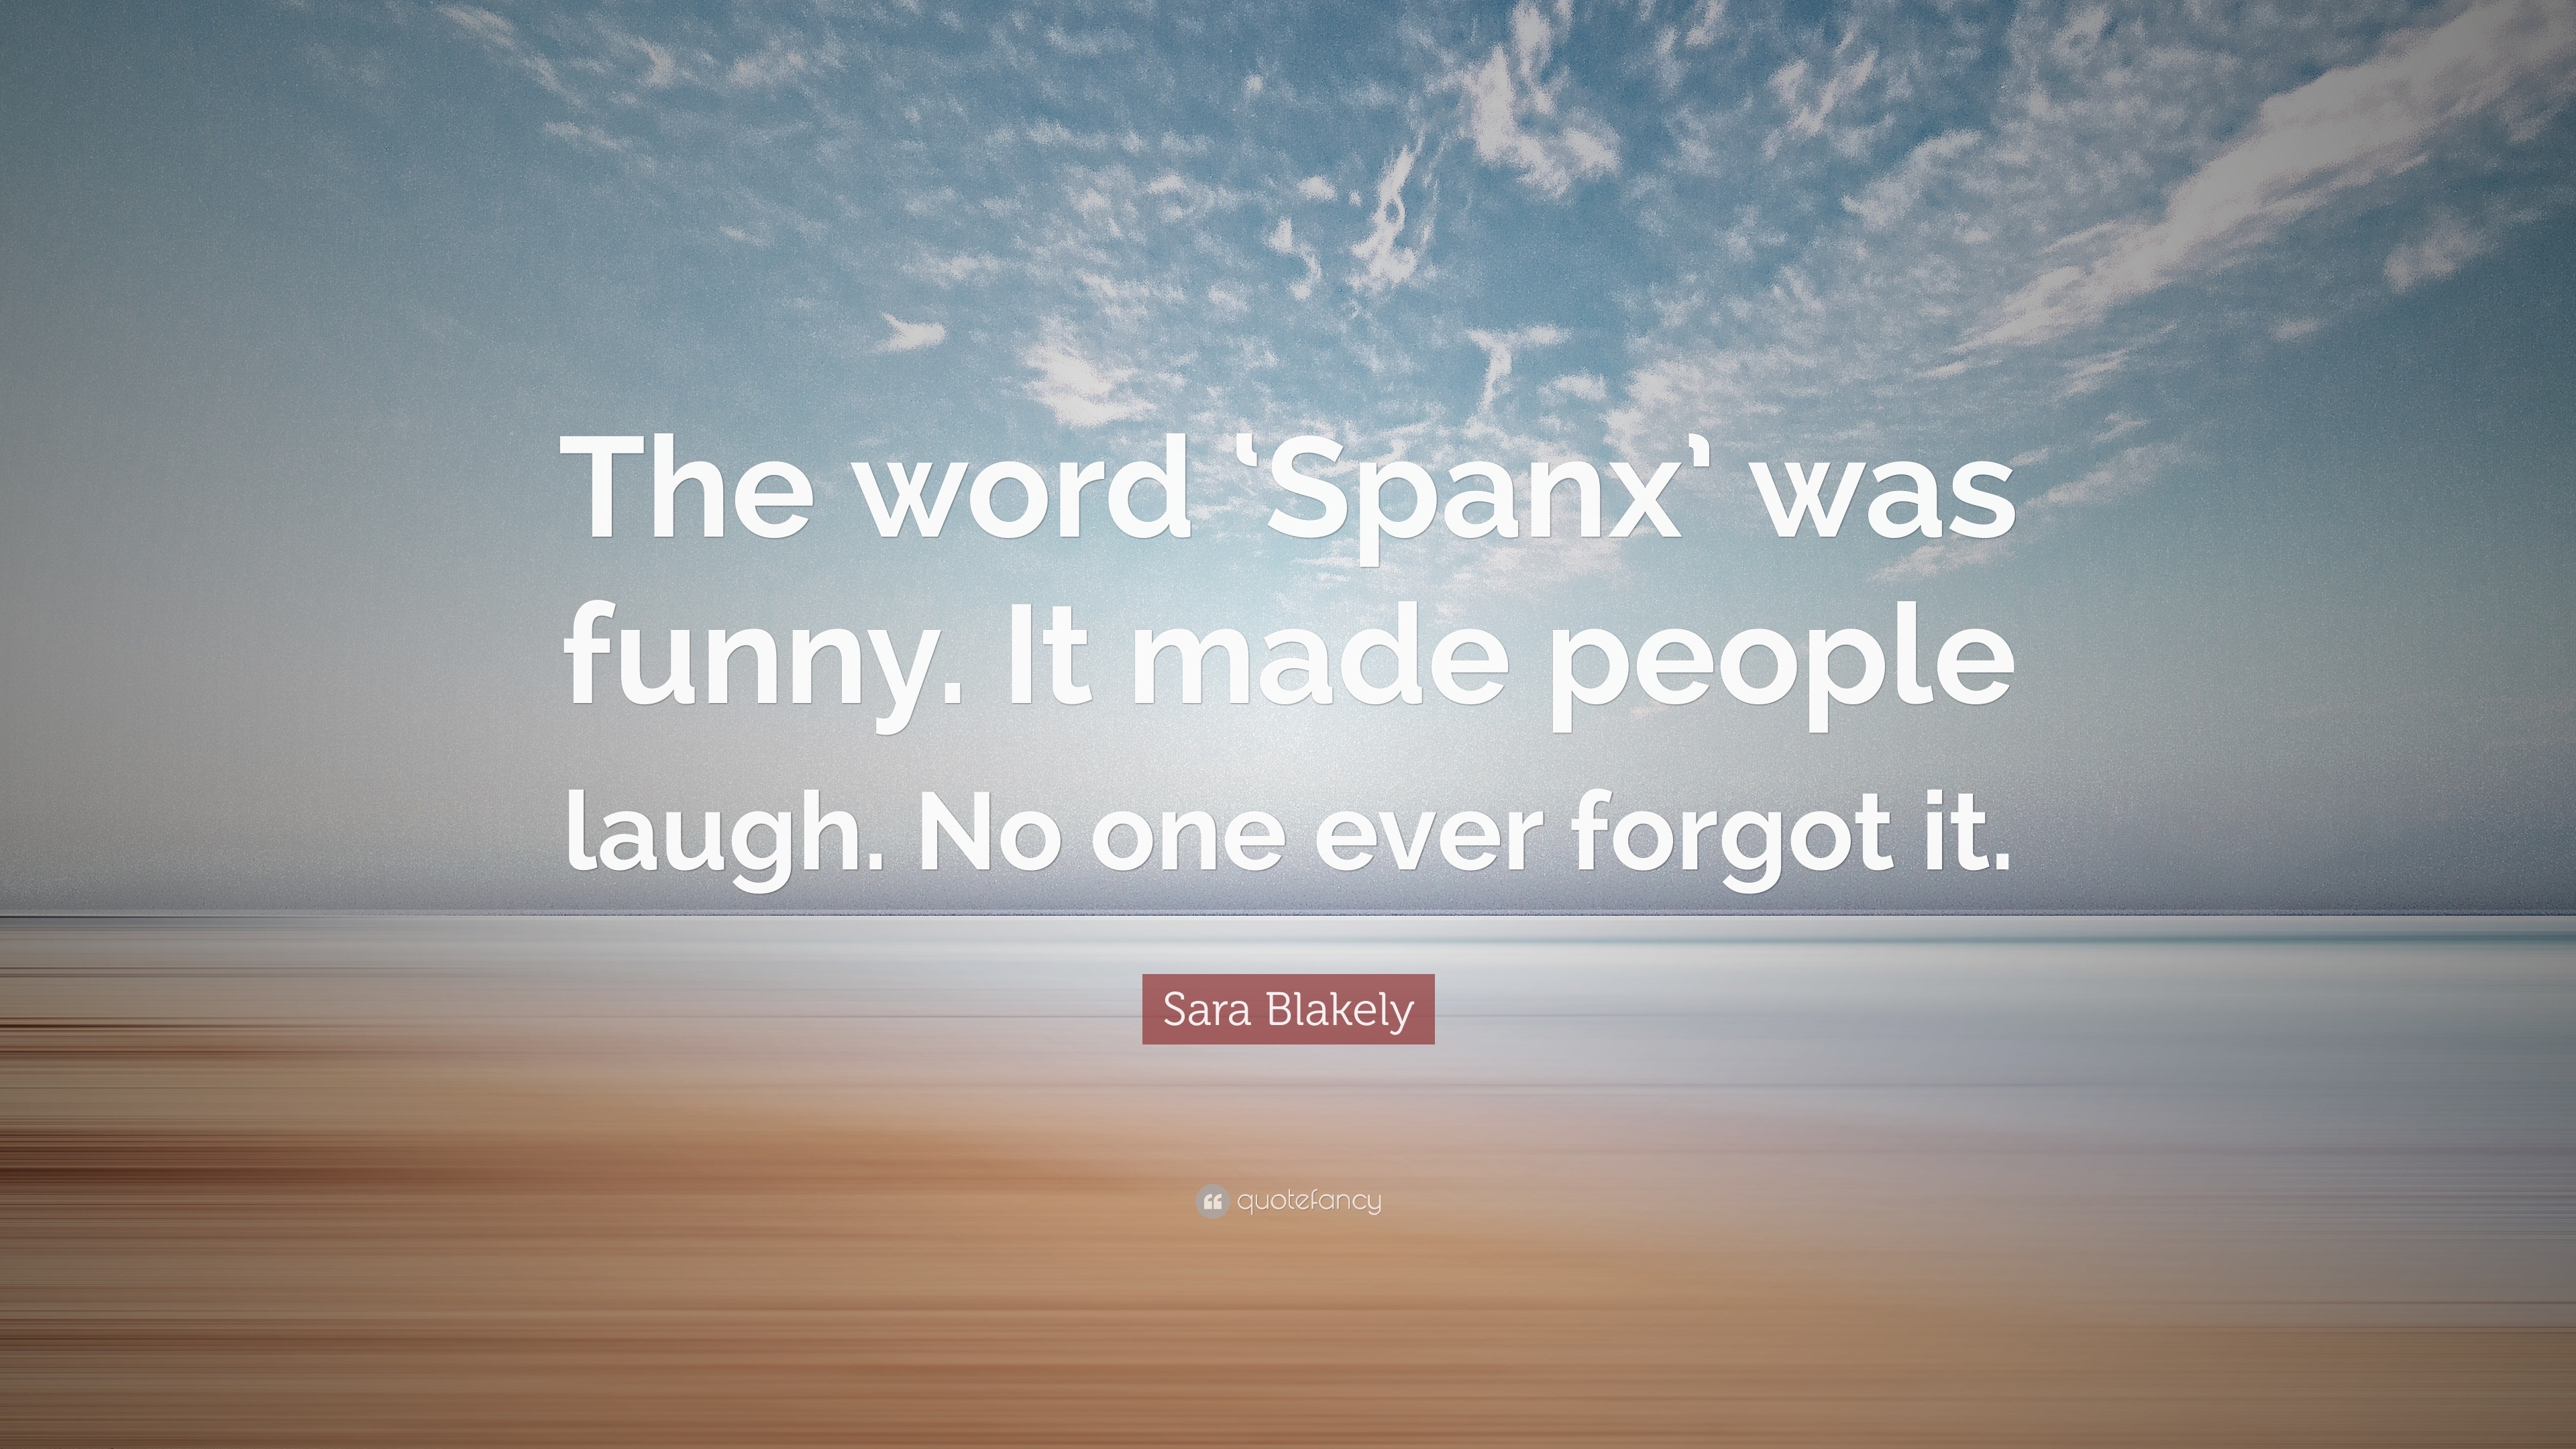 https://quotefancy.com/media/wallpaper/3840x2160/1981139-Sara-Blakely-Quote-The-word-Spanx-was-funny-It-made-people-laugh.jpg